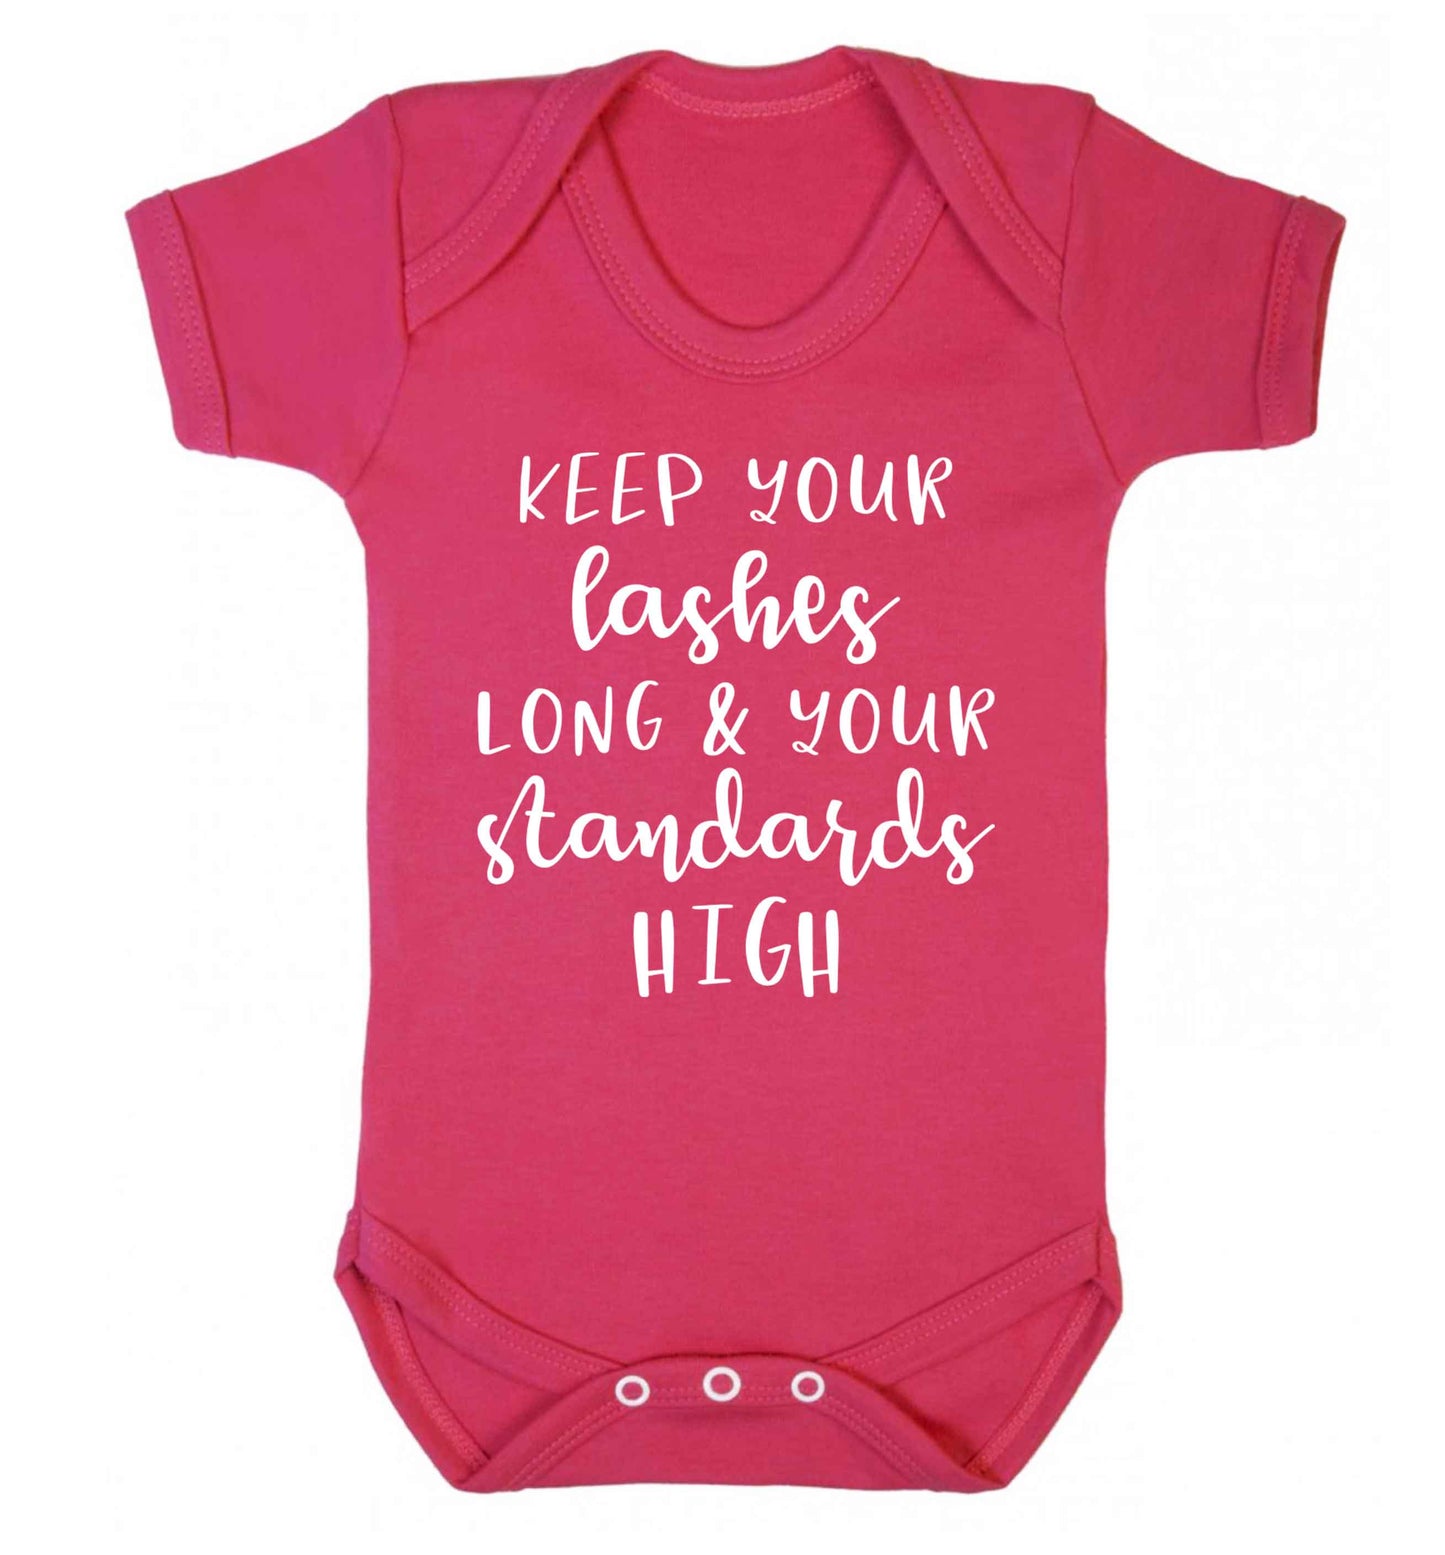 Keep your lashes long and your standards high Baby Vest dark pink 18-24 months